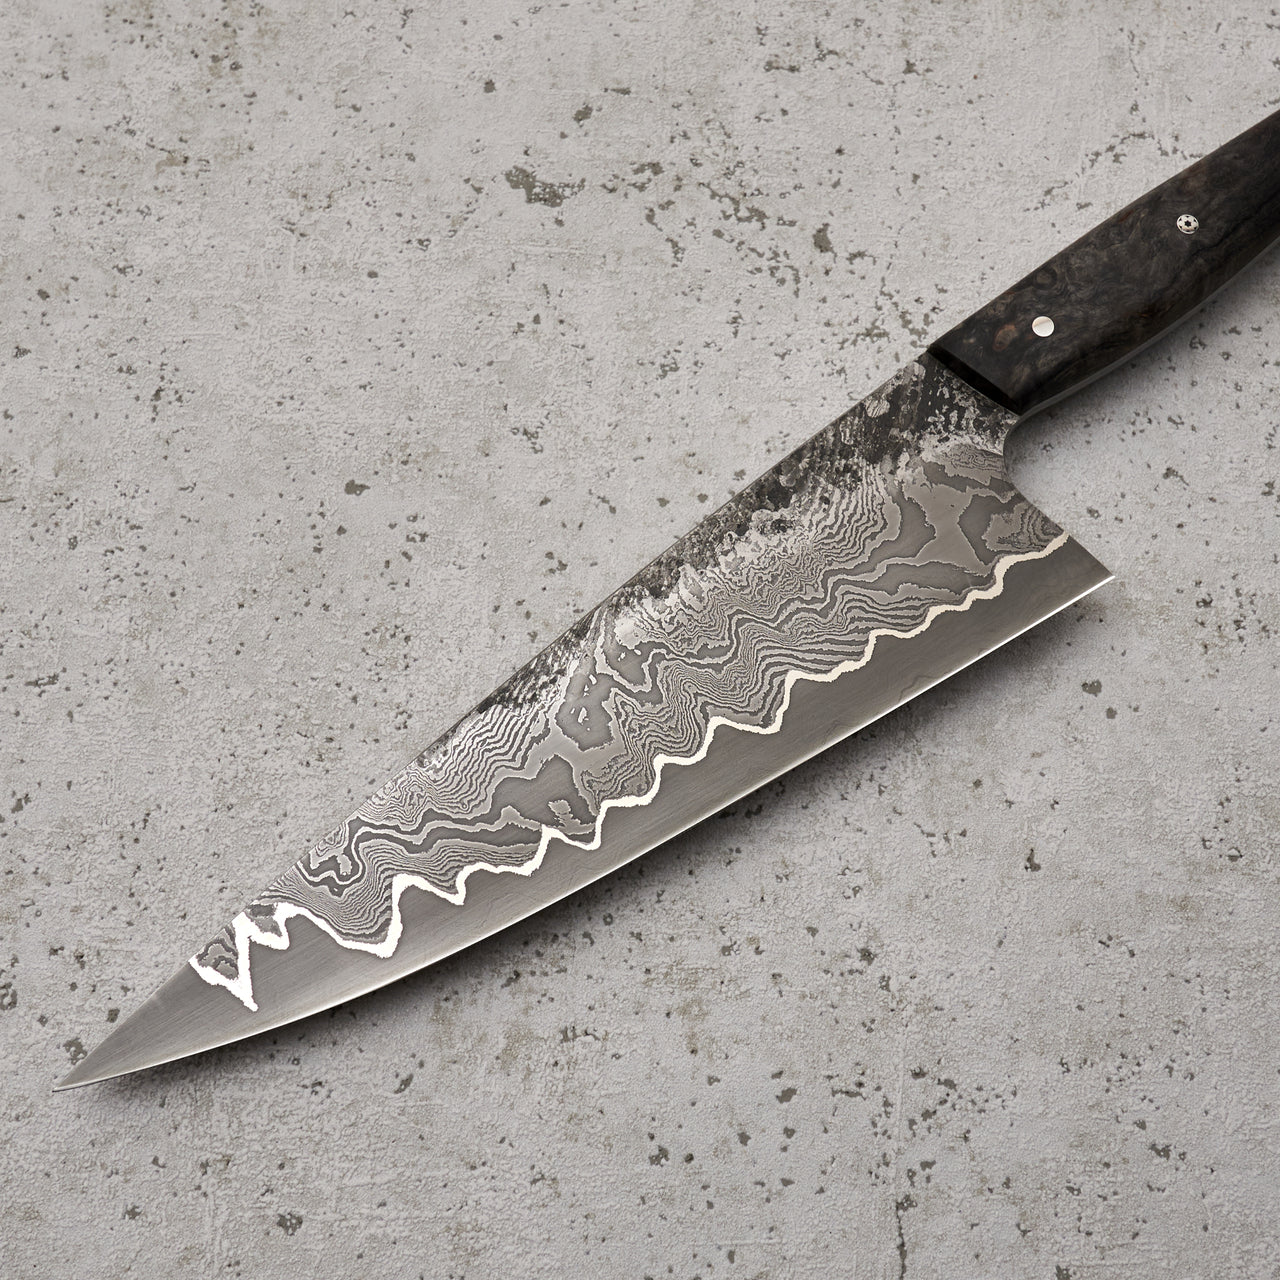 Samuel Staniforth 9 Chef Knife with Curley Birch Handle - VacMaster